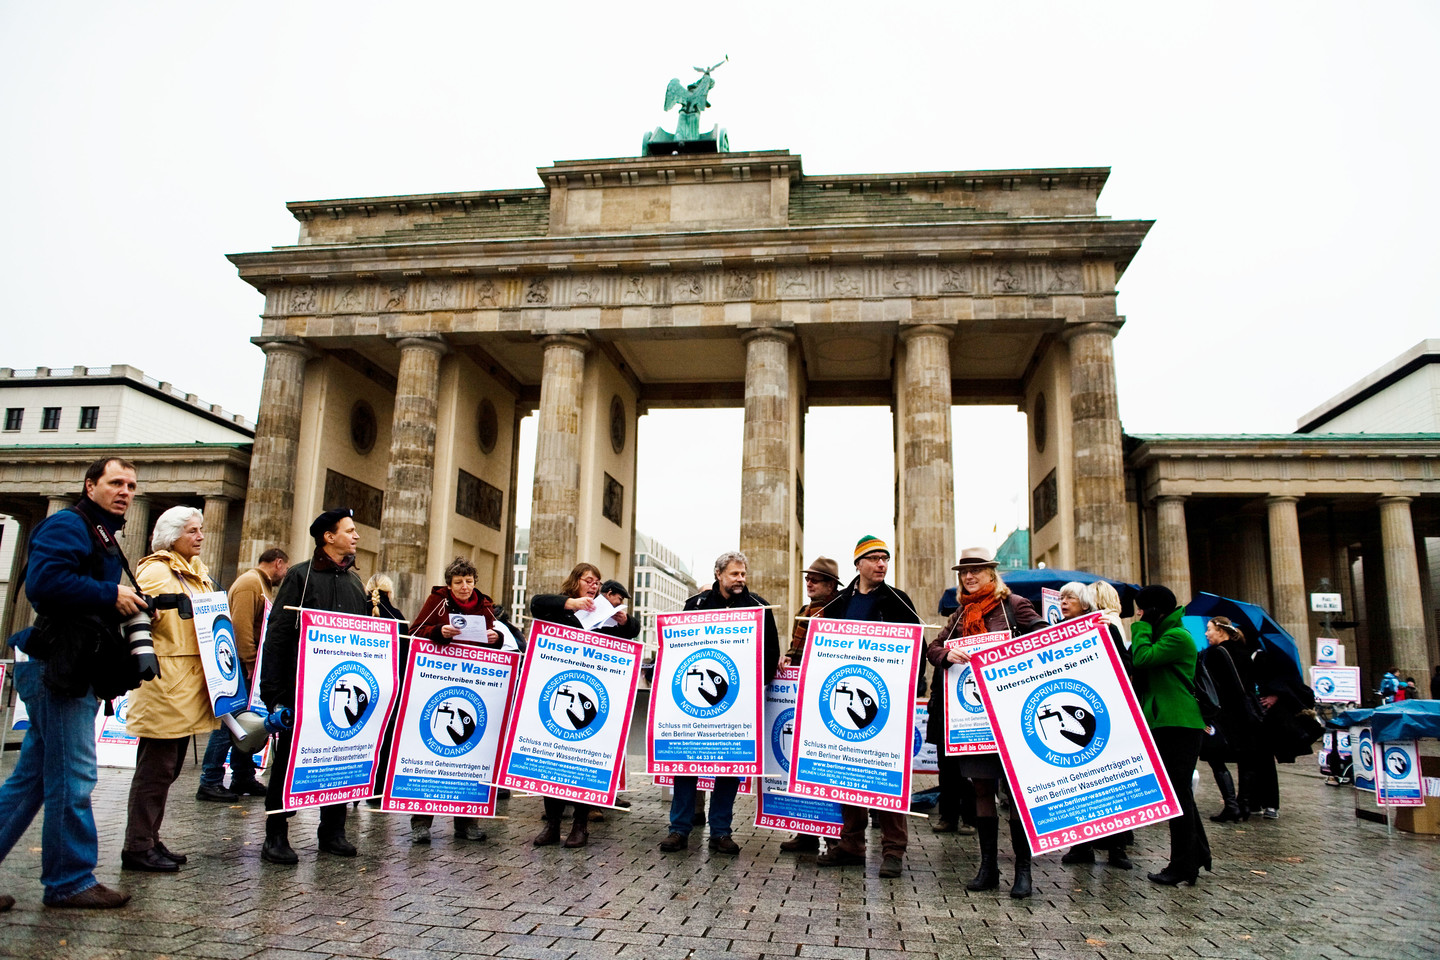 A group of water activists stand in front of the Brandenburger Tor holding protest signs.